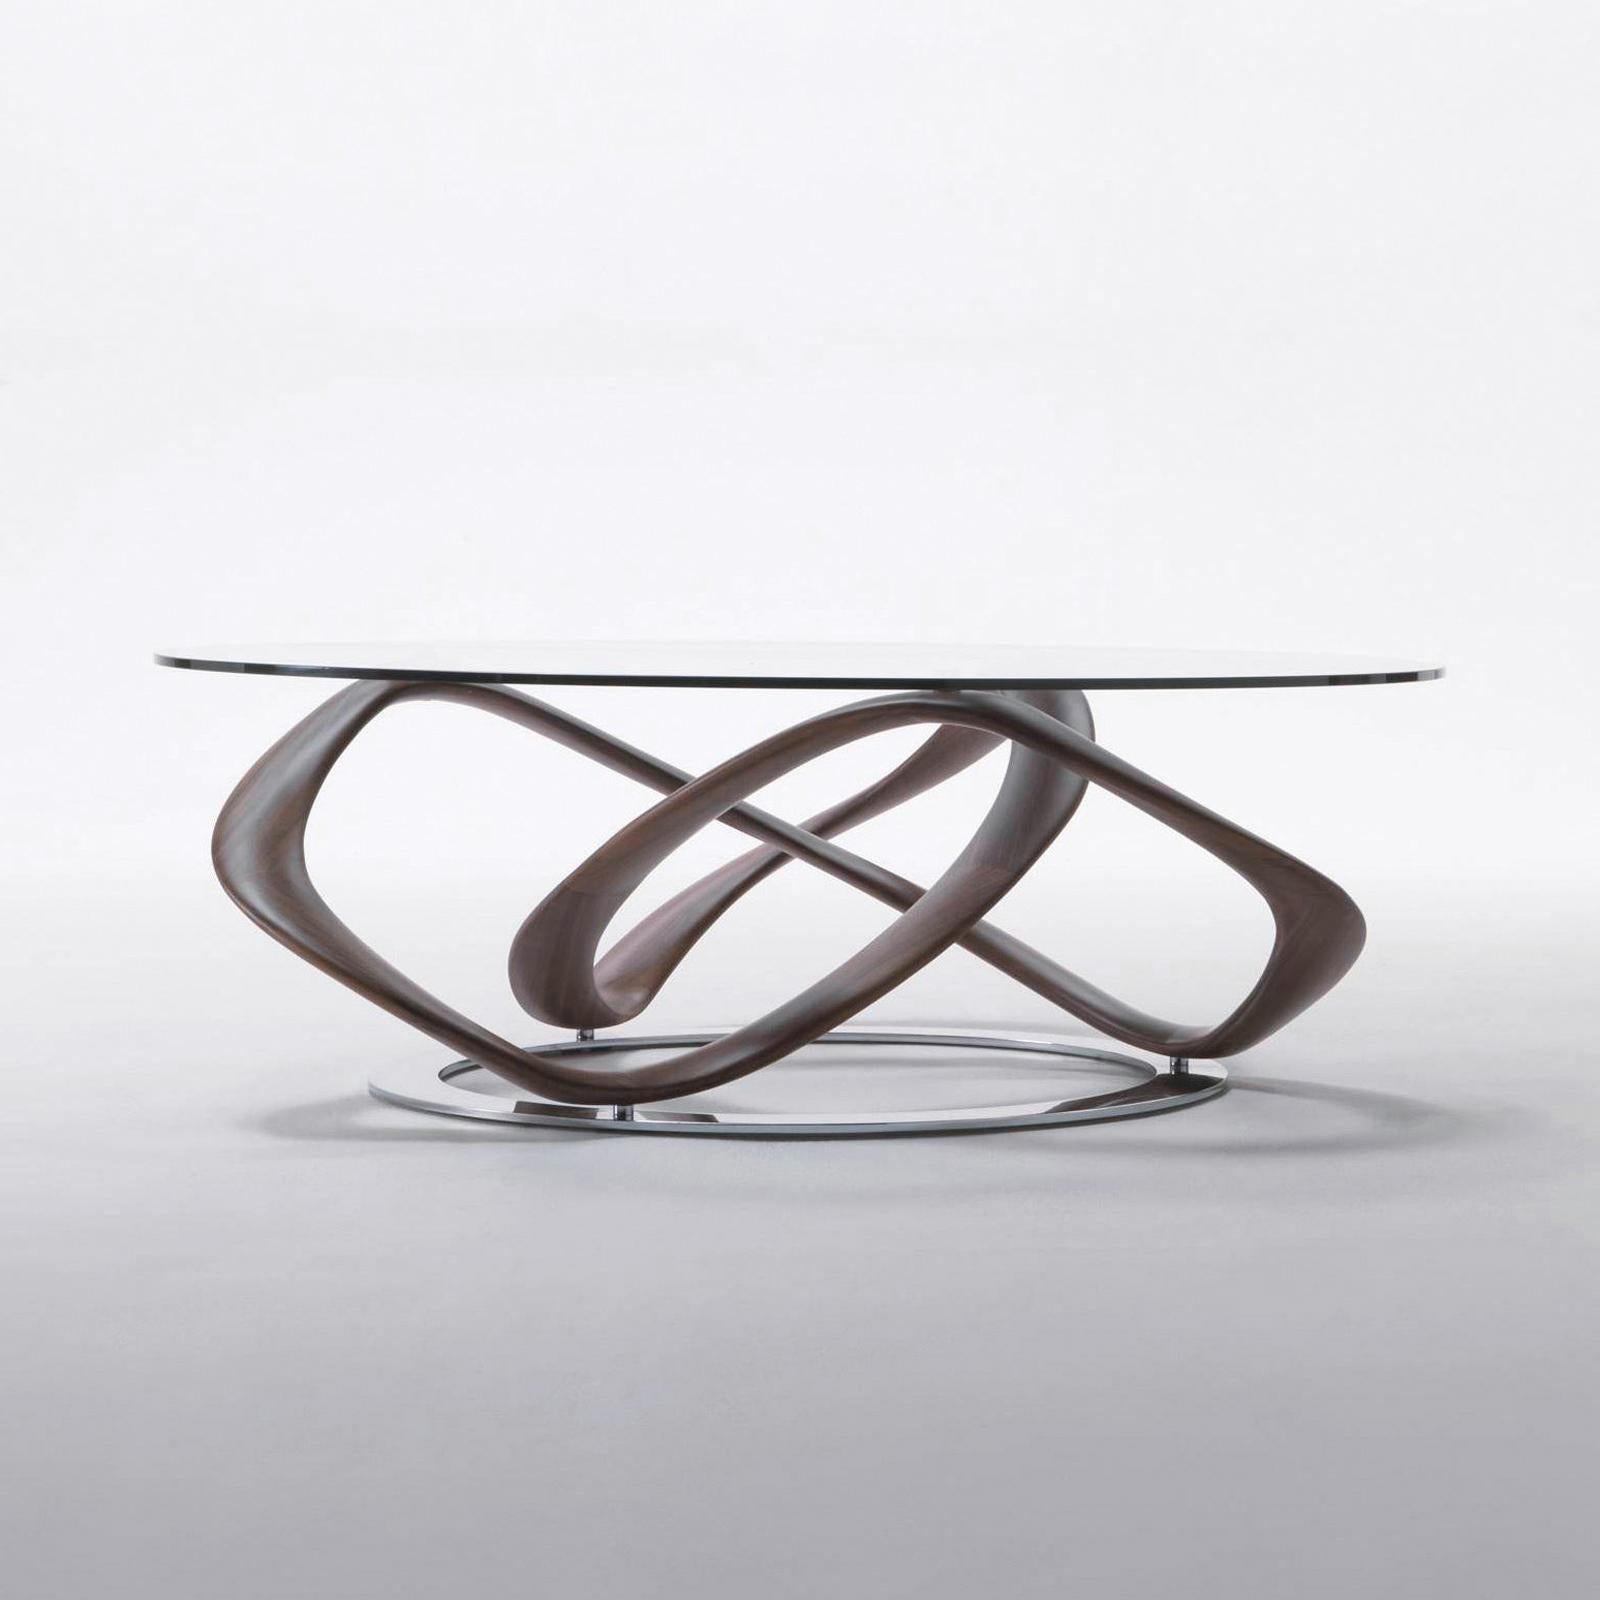 Coffee table Limitless with base in solid walnut wood,
handcrafted wood. On chrome-plated metal ground base.
With tempered clear glass top (10mm thickness).
Available on request in:
Diameter 120cm x height 39cm, price: 9600,00€.
Diameter 130cm x